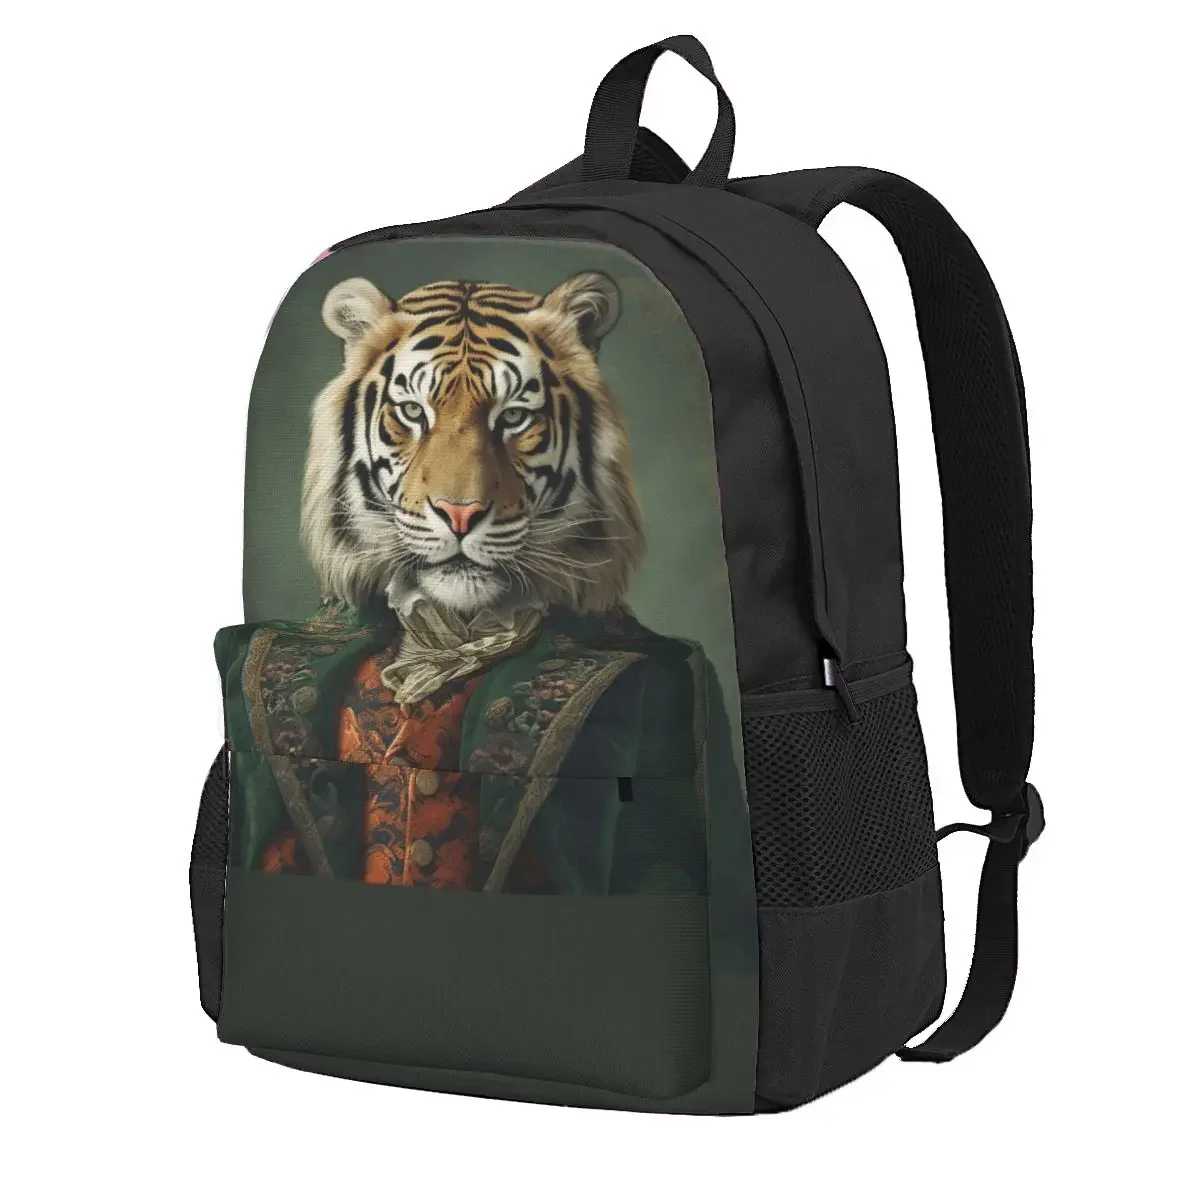 

Tiger Backpack Dapper Clothing Amazing Portraits Style Backpacks Girl College Print School Bags High Quality Rucksack